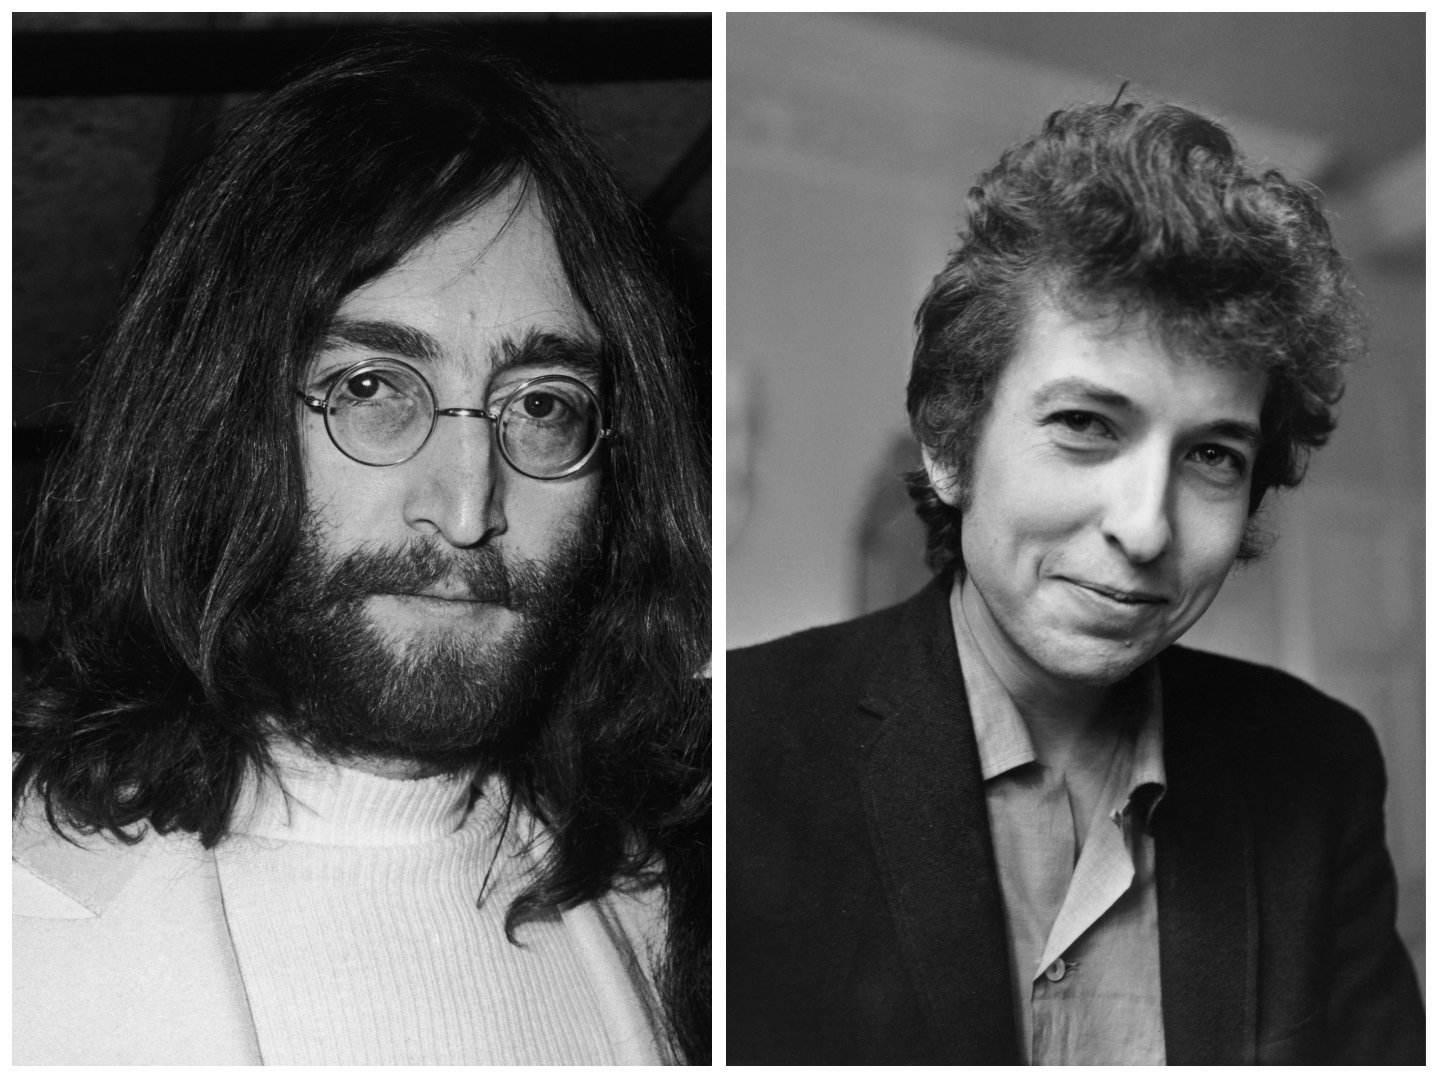 John Lennon Said He and Bob Dylan Were ‘Uptight’ Around Each Other